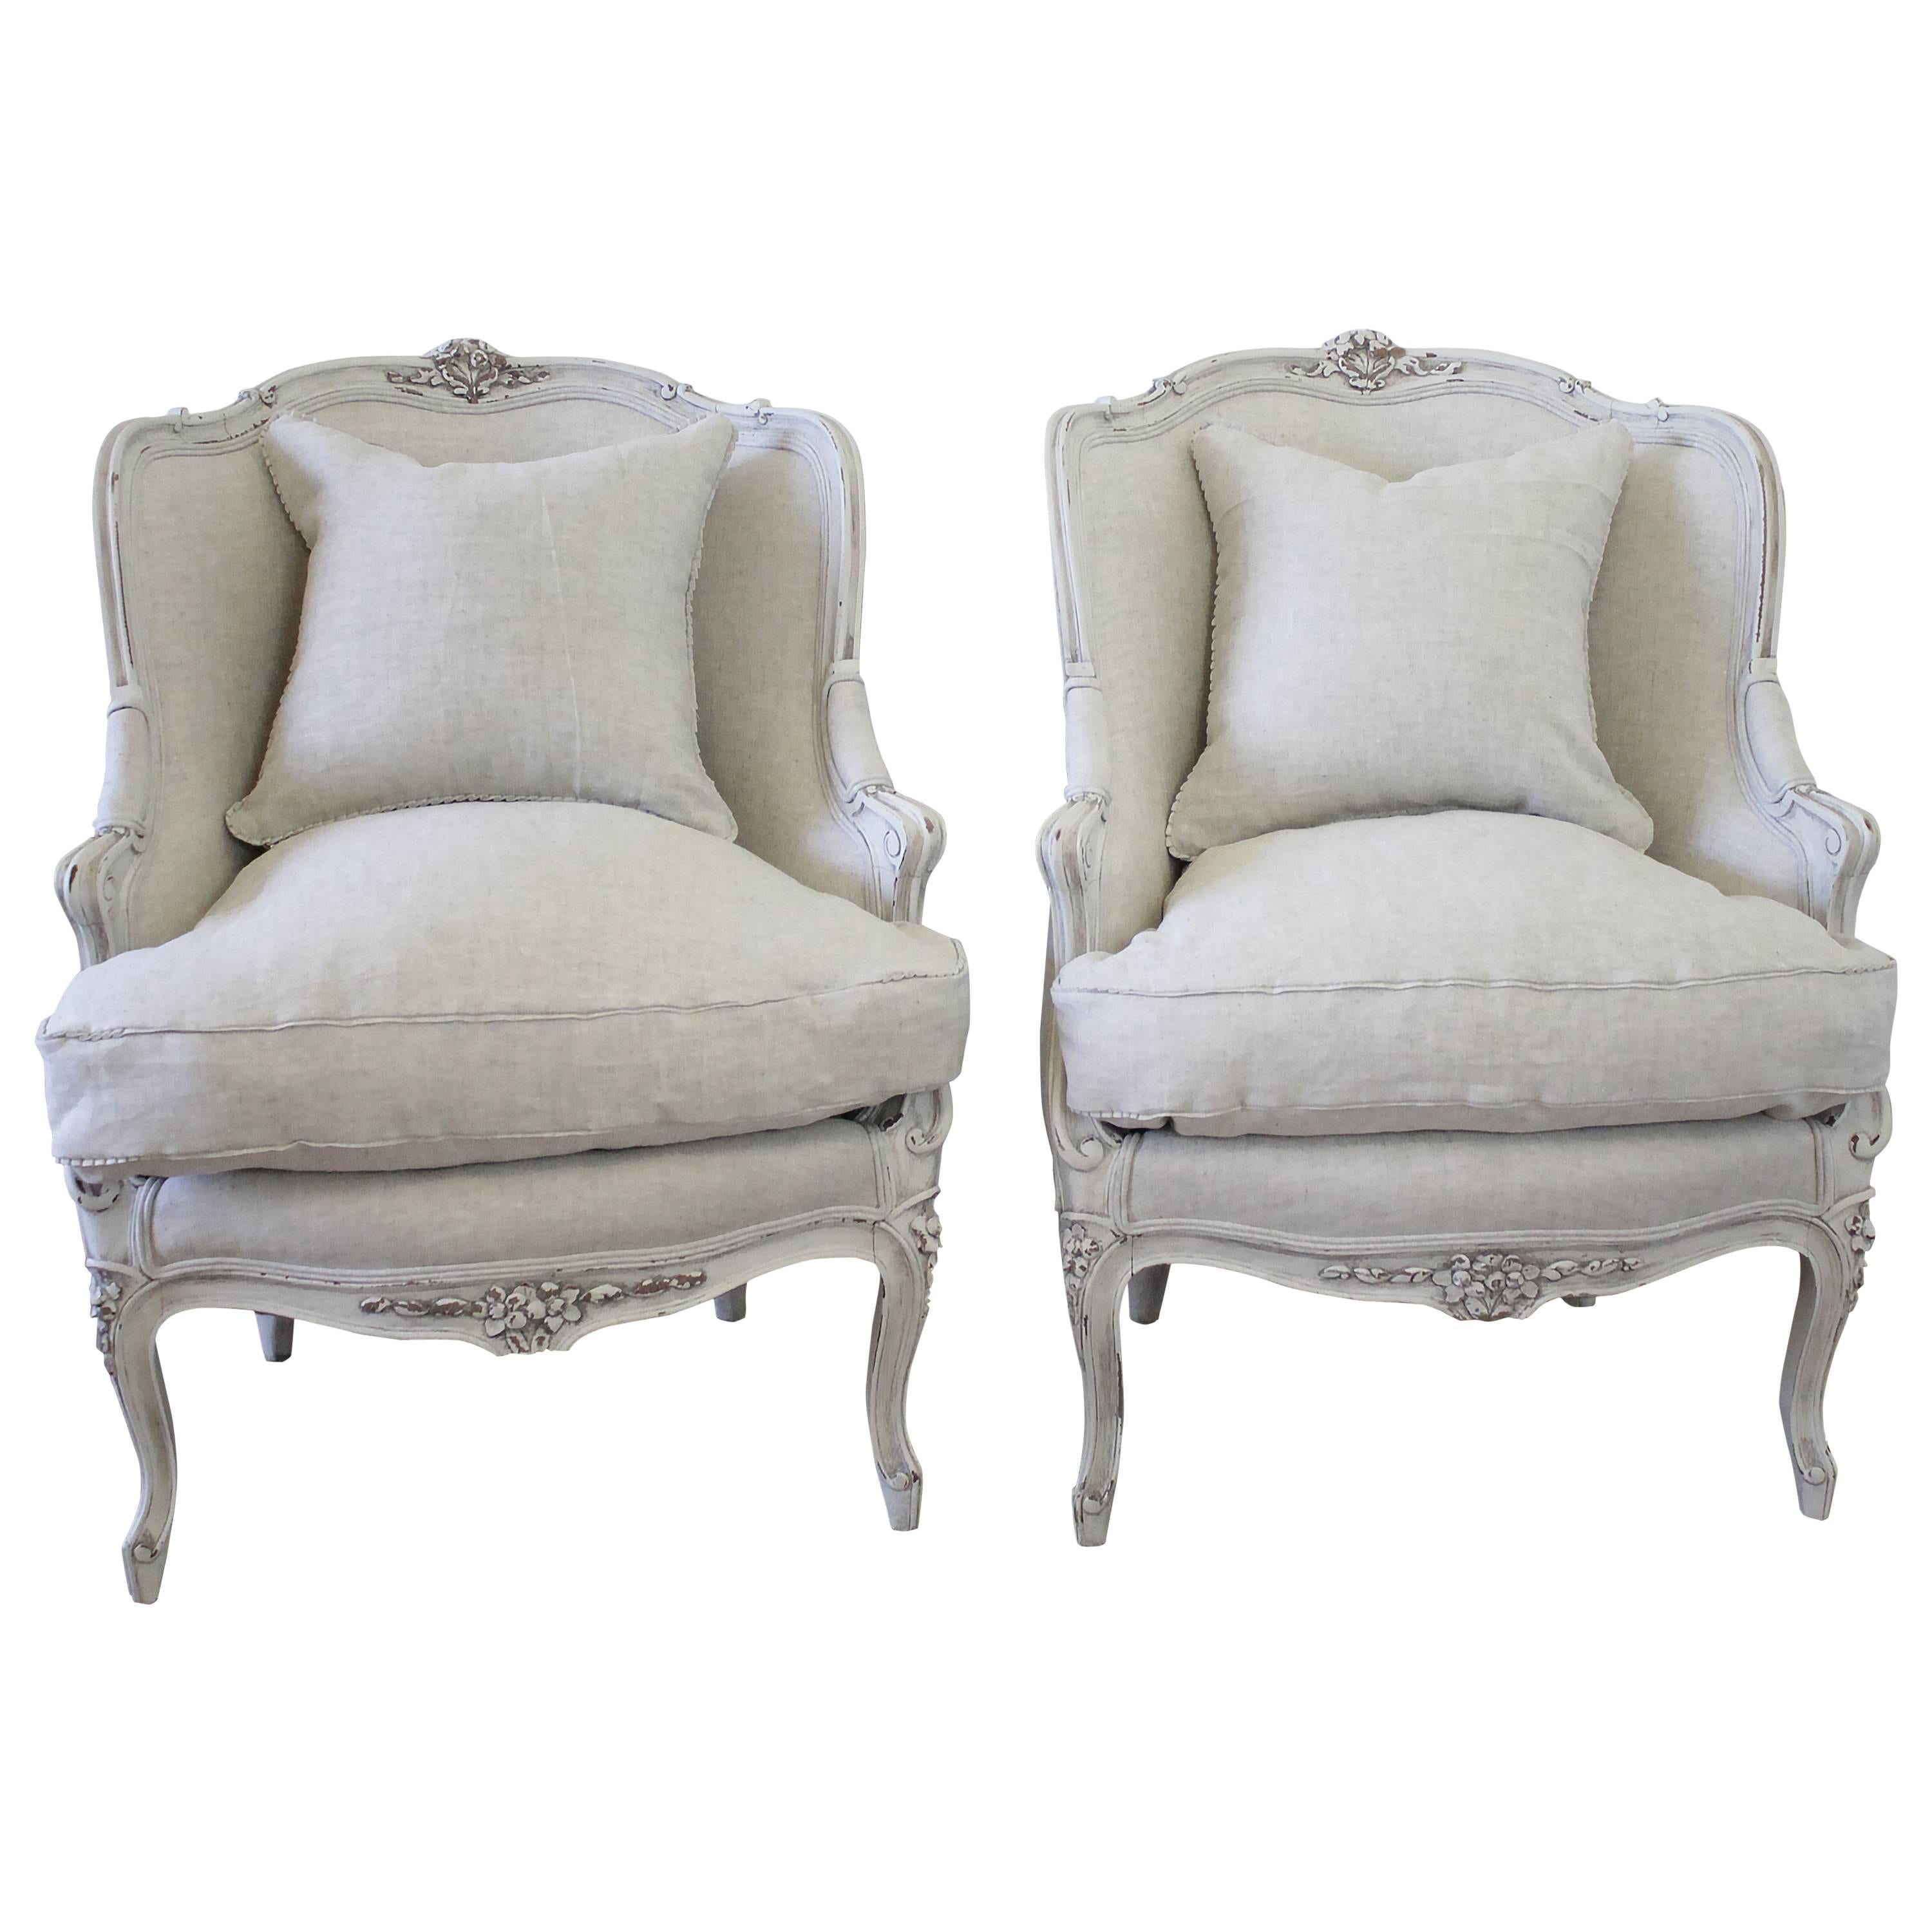 20th Century Antique Painted French Louis XV Style Bergere Chairs in Linen